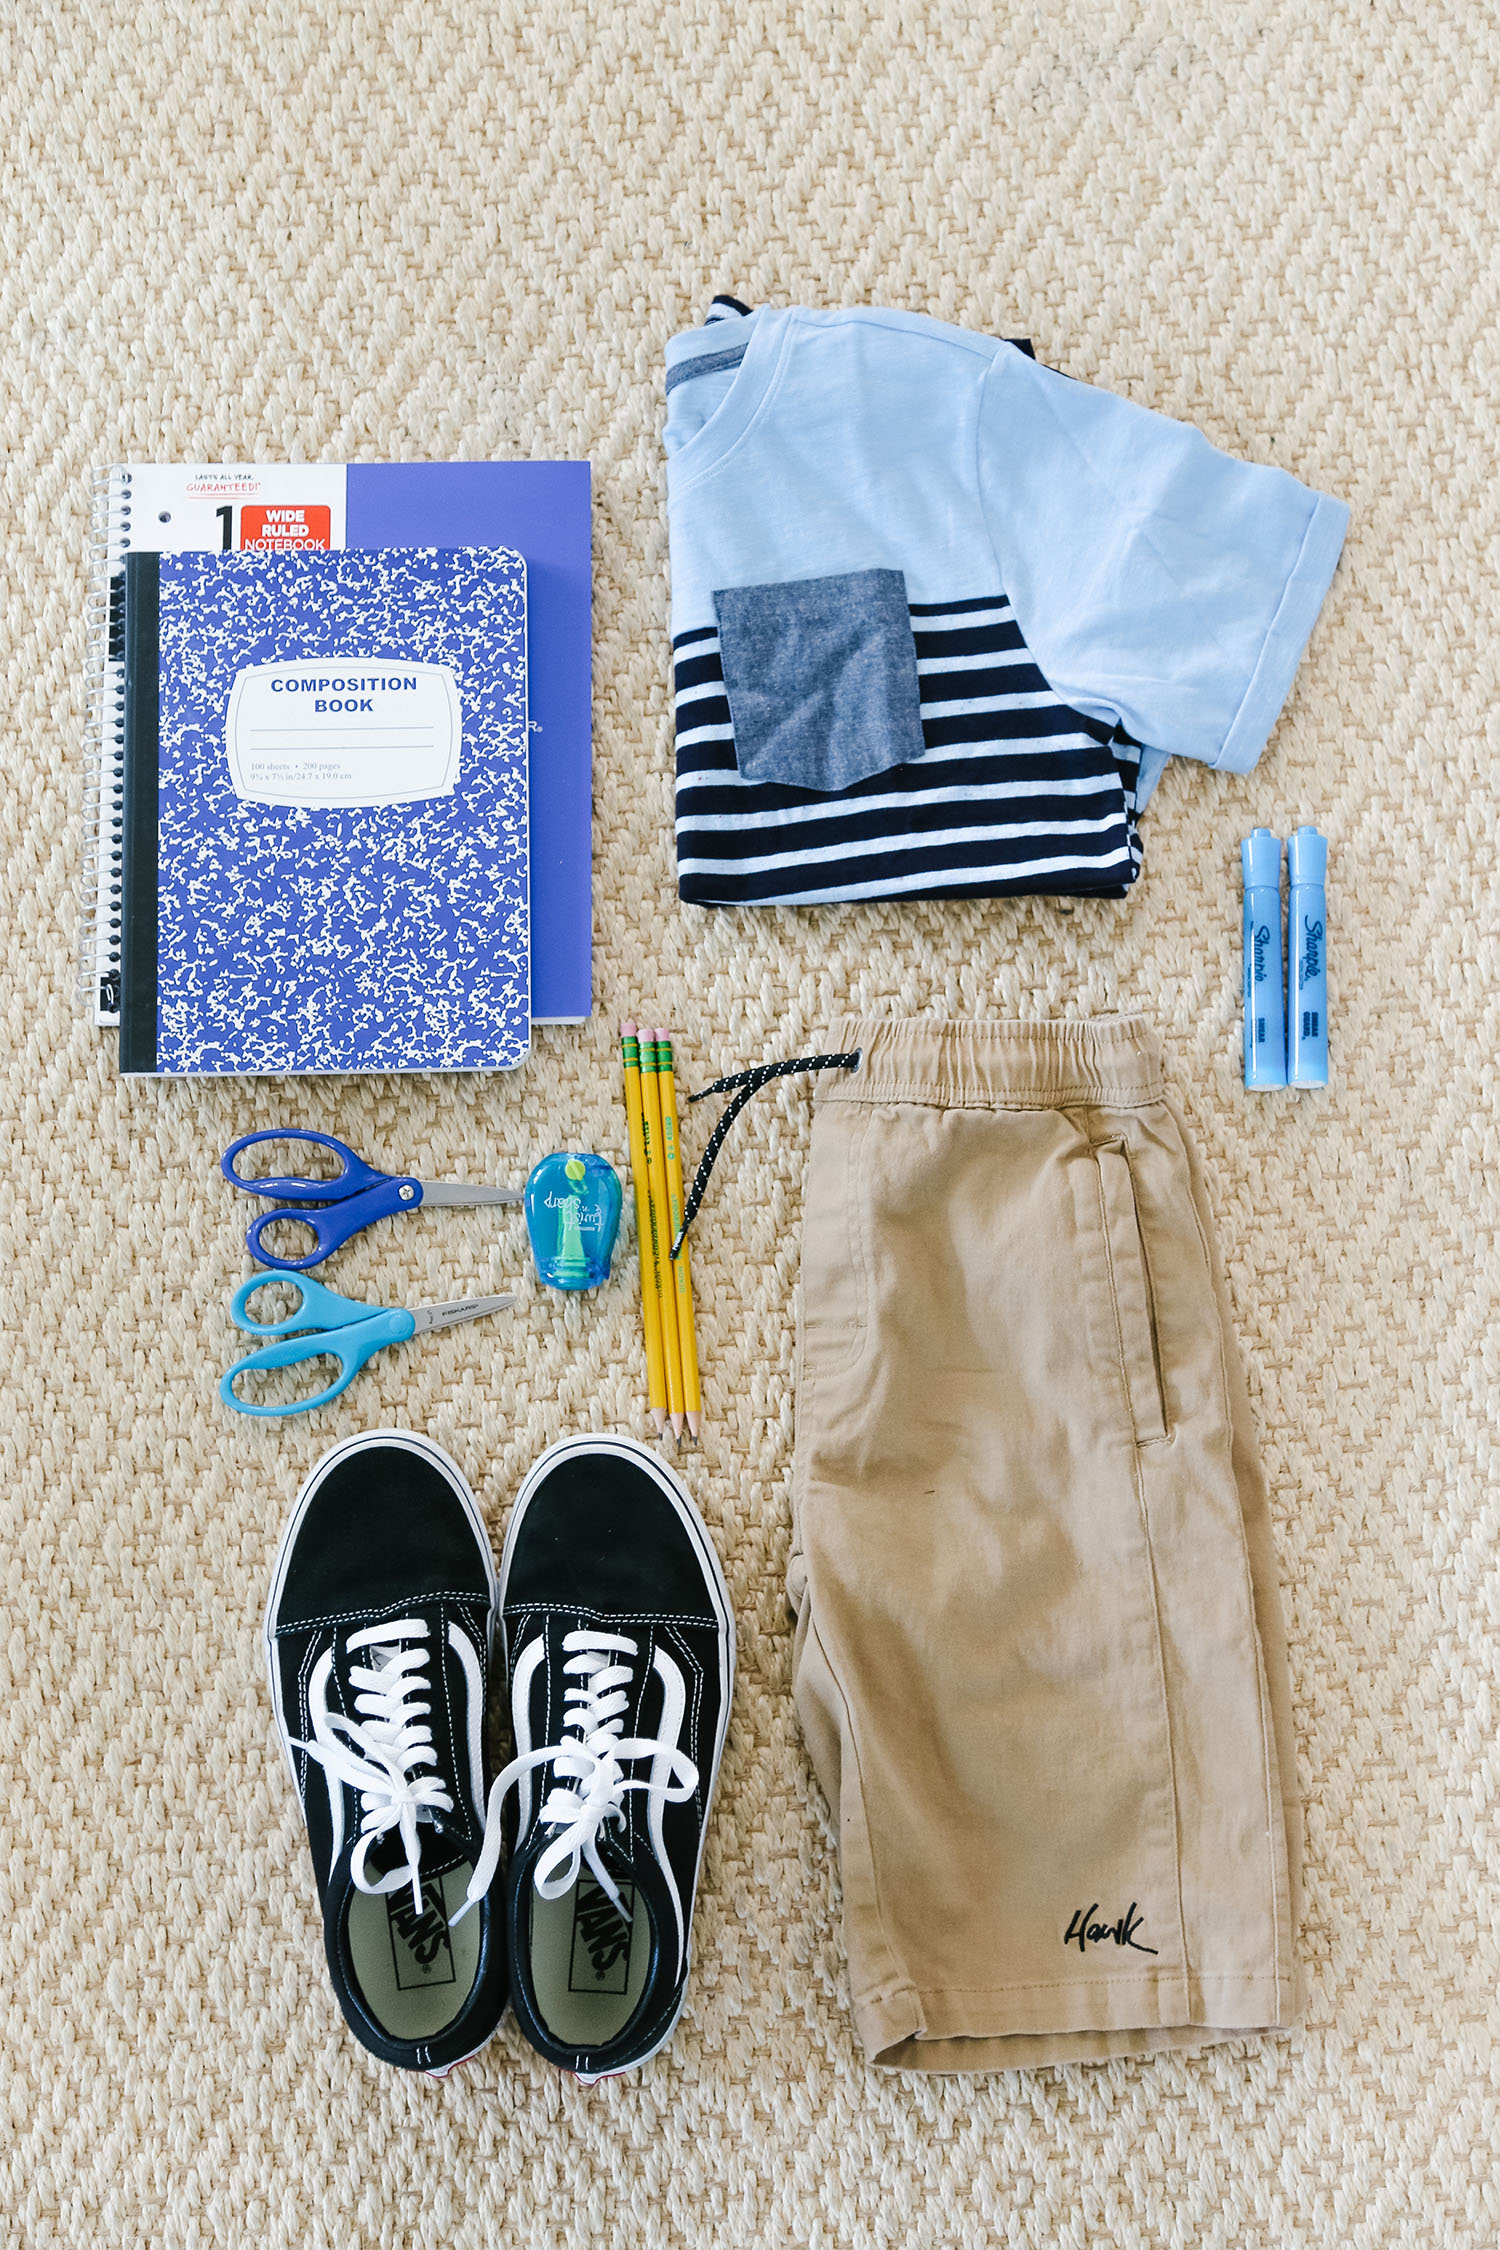 Walmart Back to School Favorites: Outfits, Supplies & Backpacks featured by US lifestyle blogger, By Jen Rose